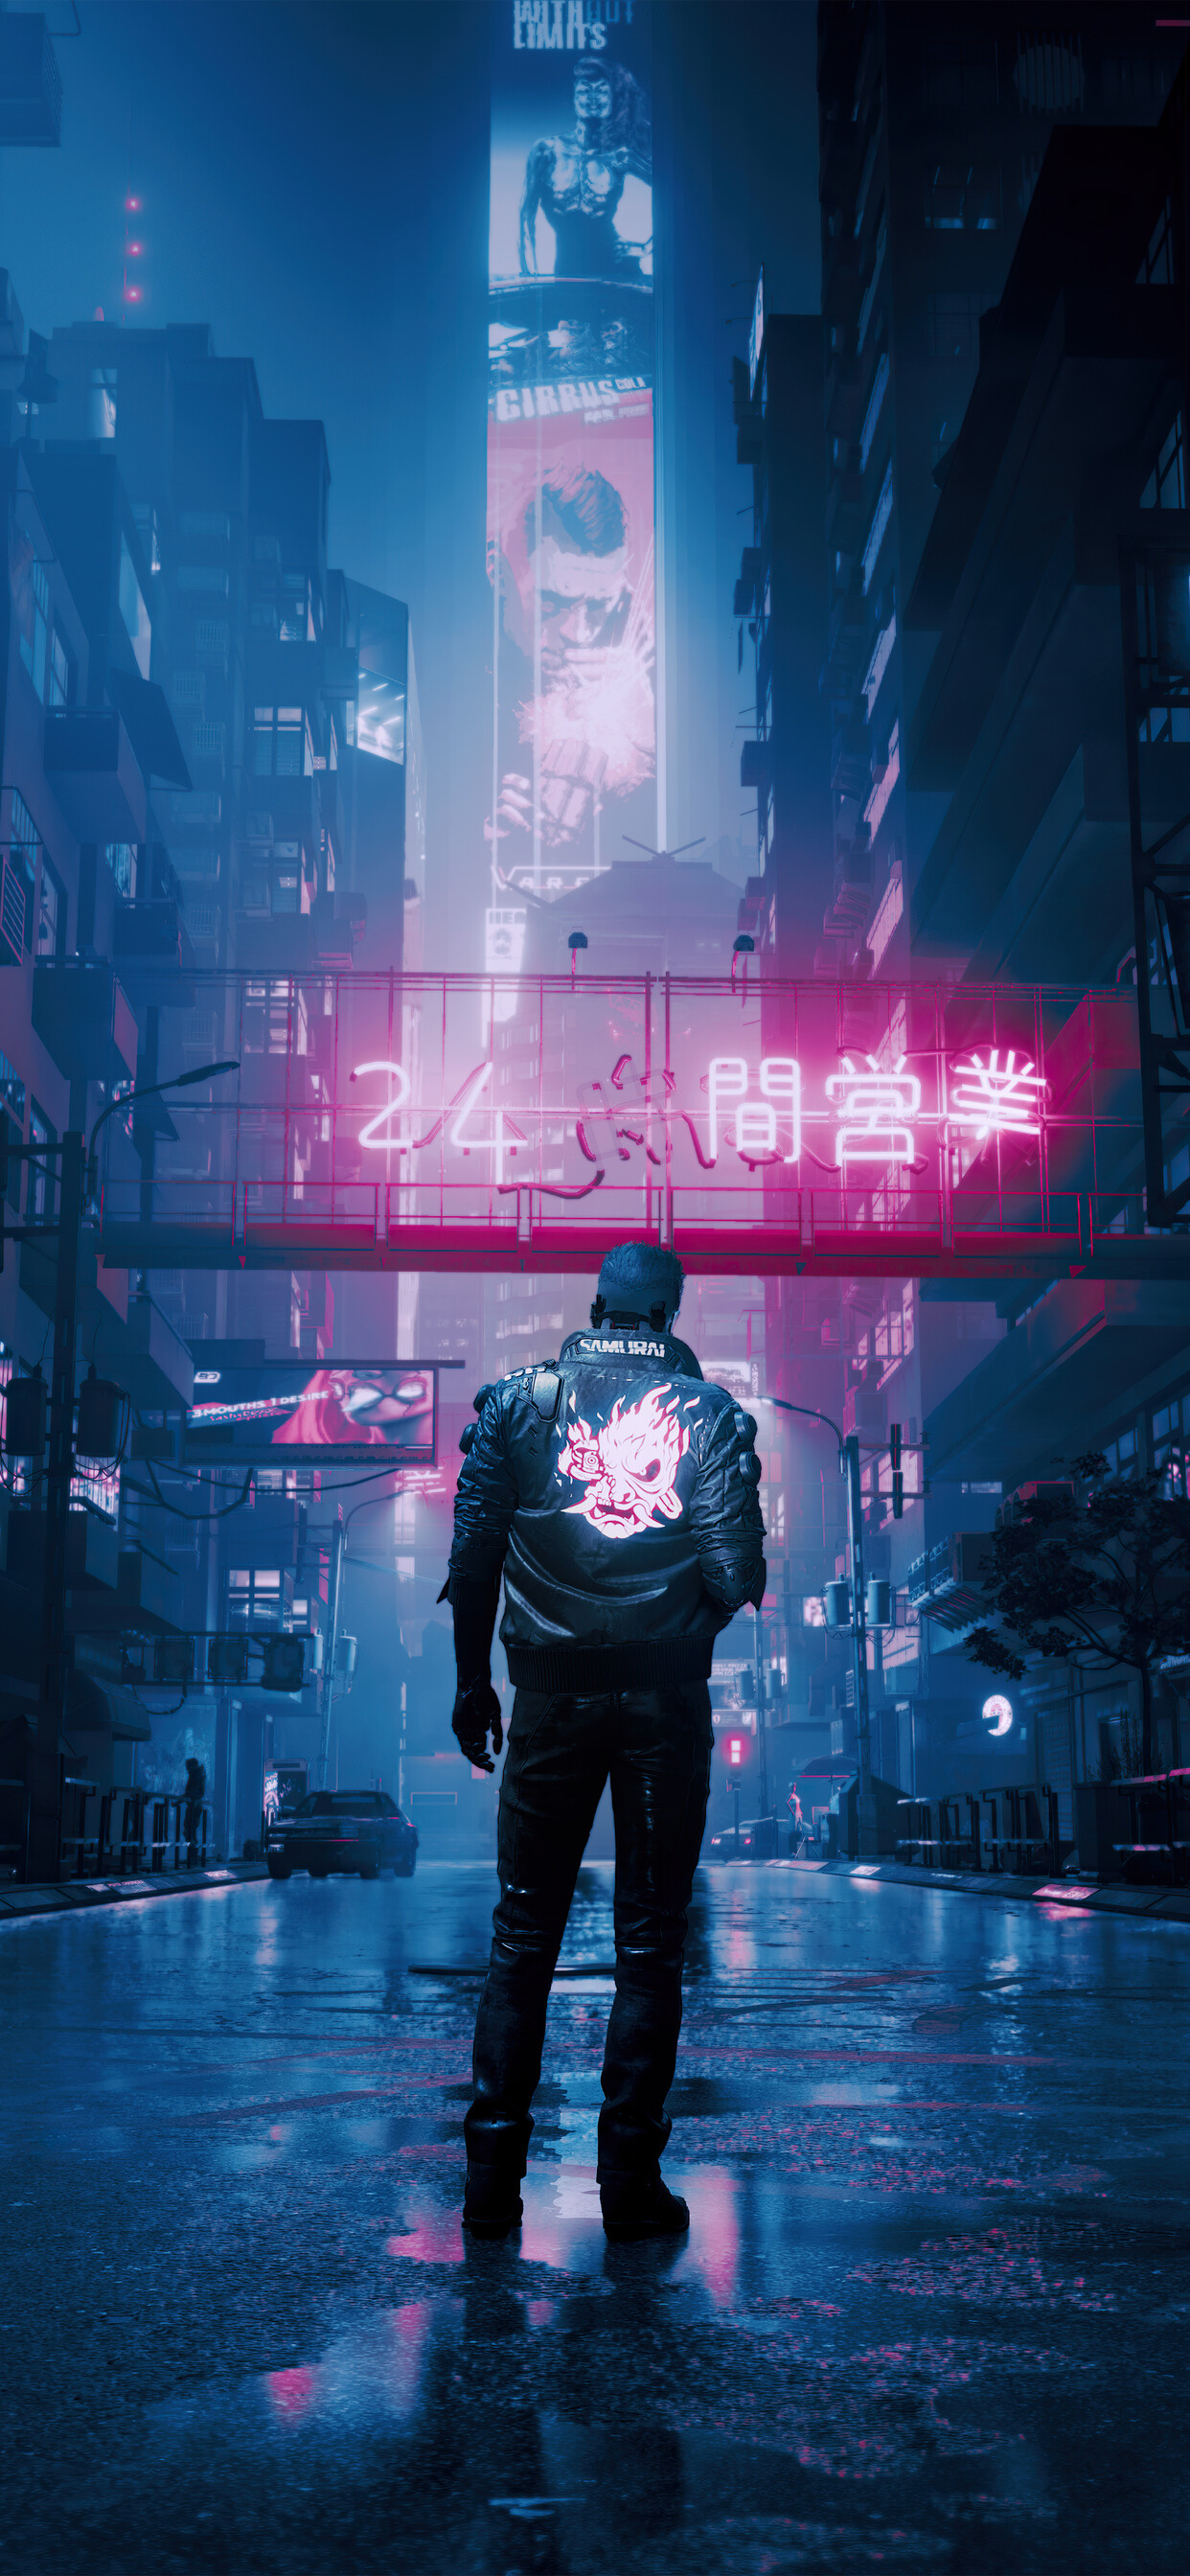 Cyberpunk 2077: An open-world, action-adventure RPG set in the megalopolis of Night City. 1250x2690 HD Wallpaper.